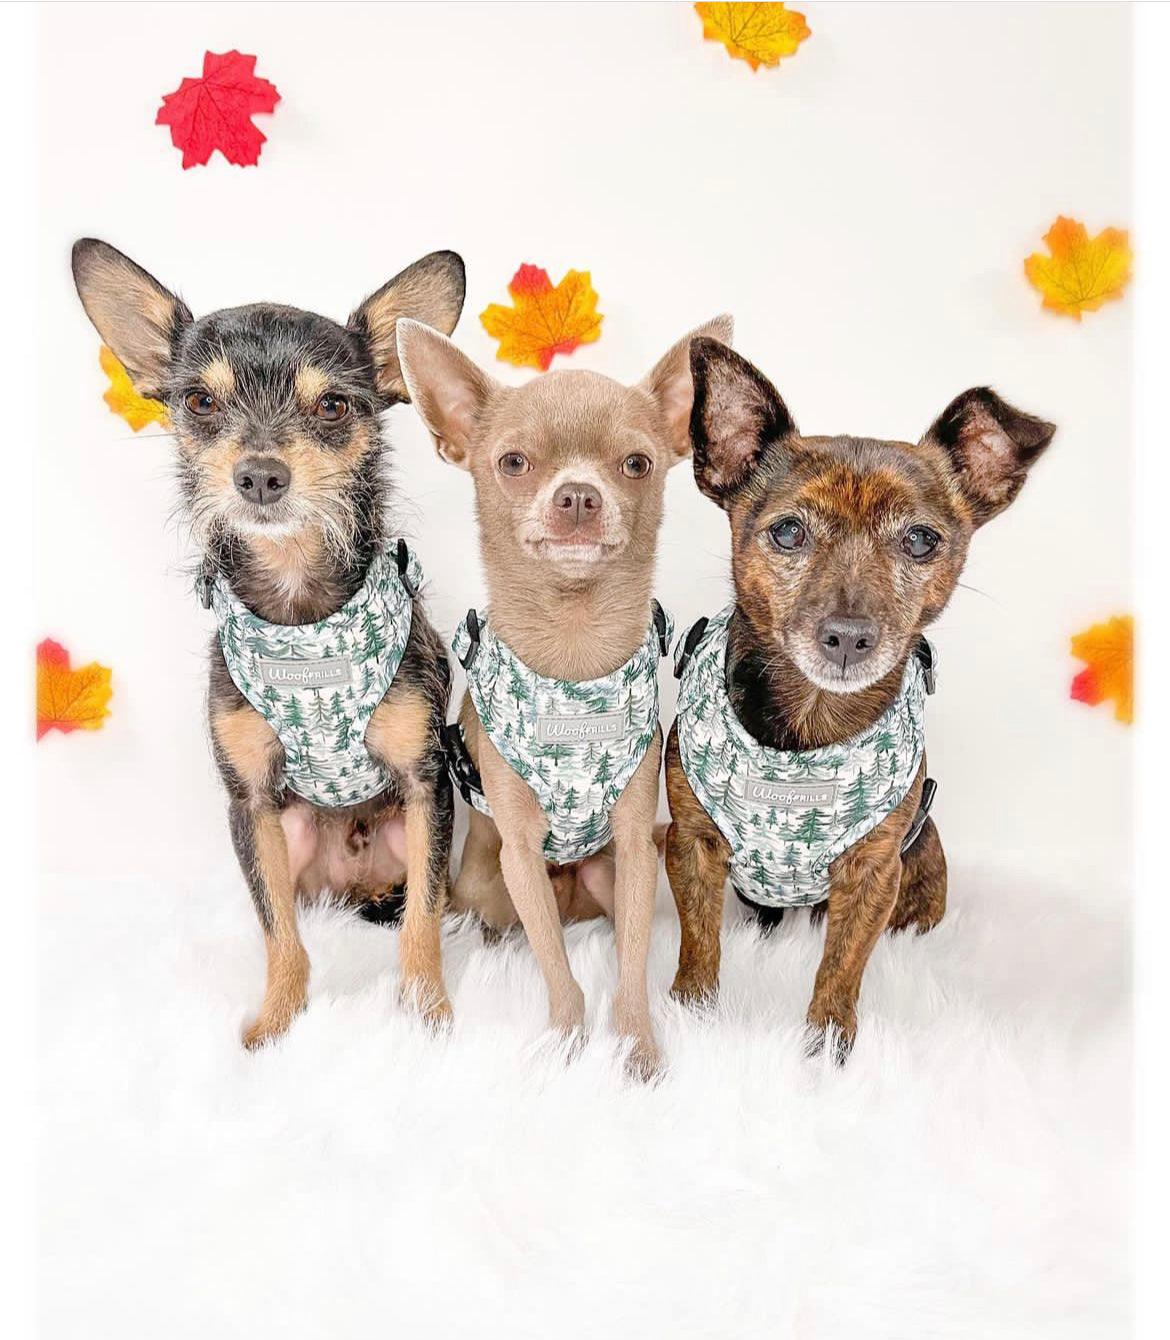 Three small dogs wearing xs dog harness matching dog outfit